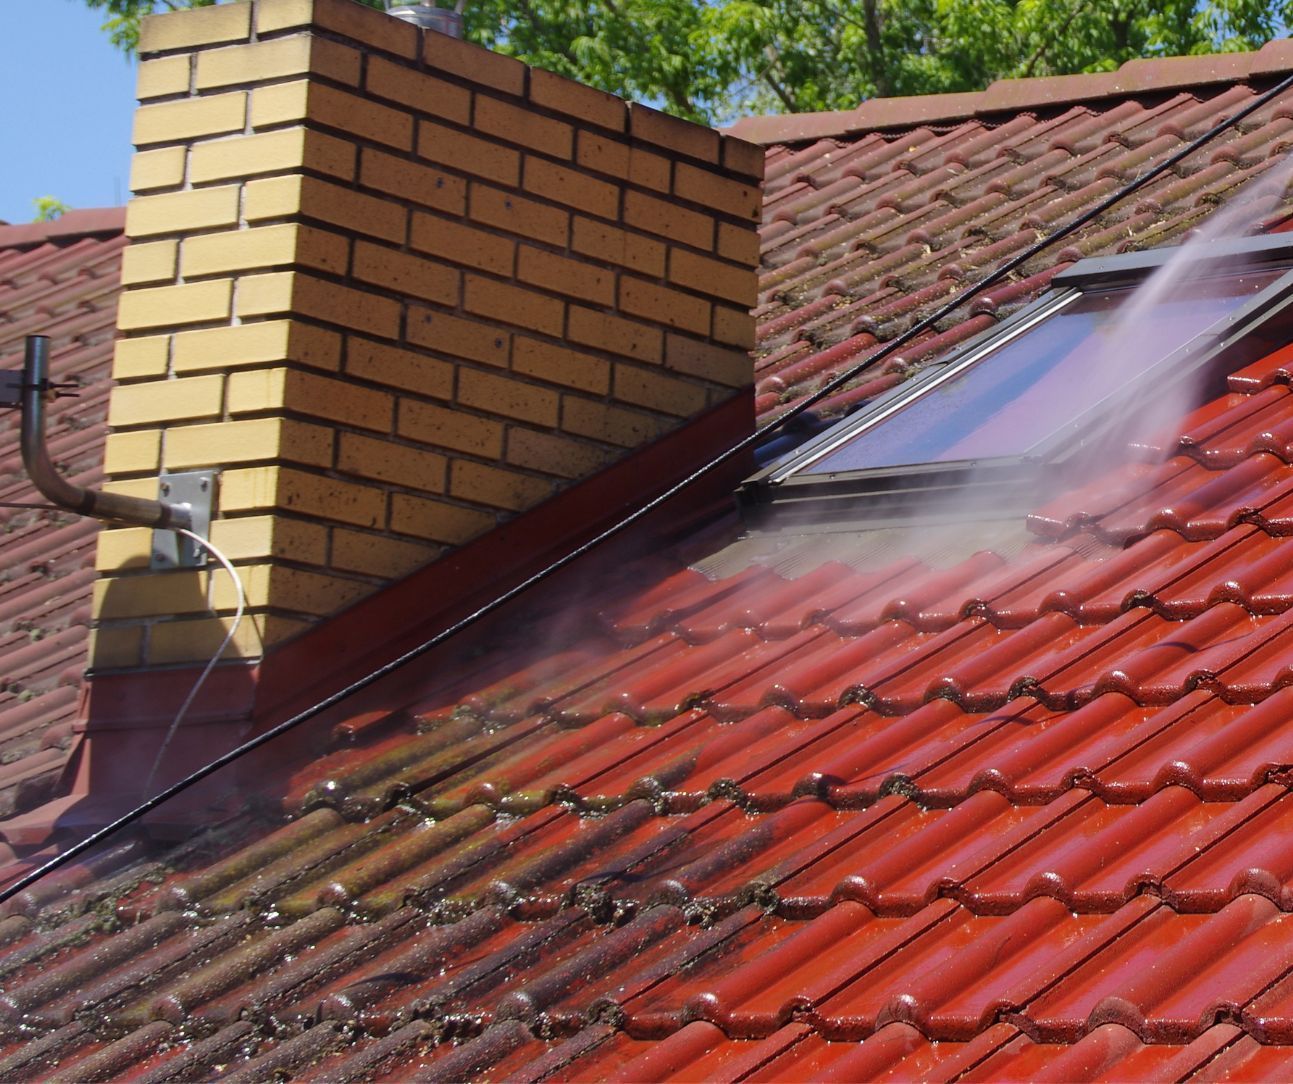 A red-tiled roof being cleaned and washed by experts, removing dirt.